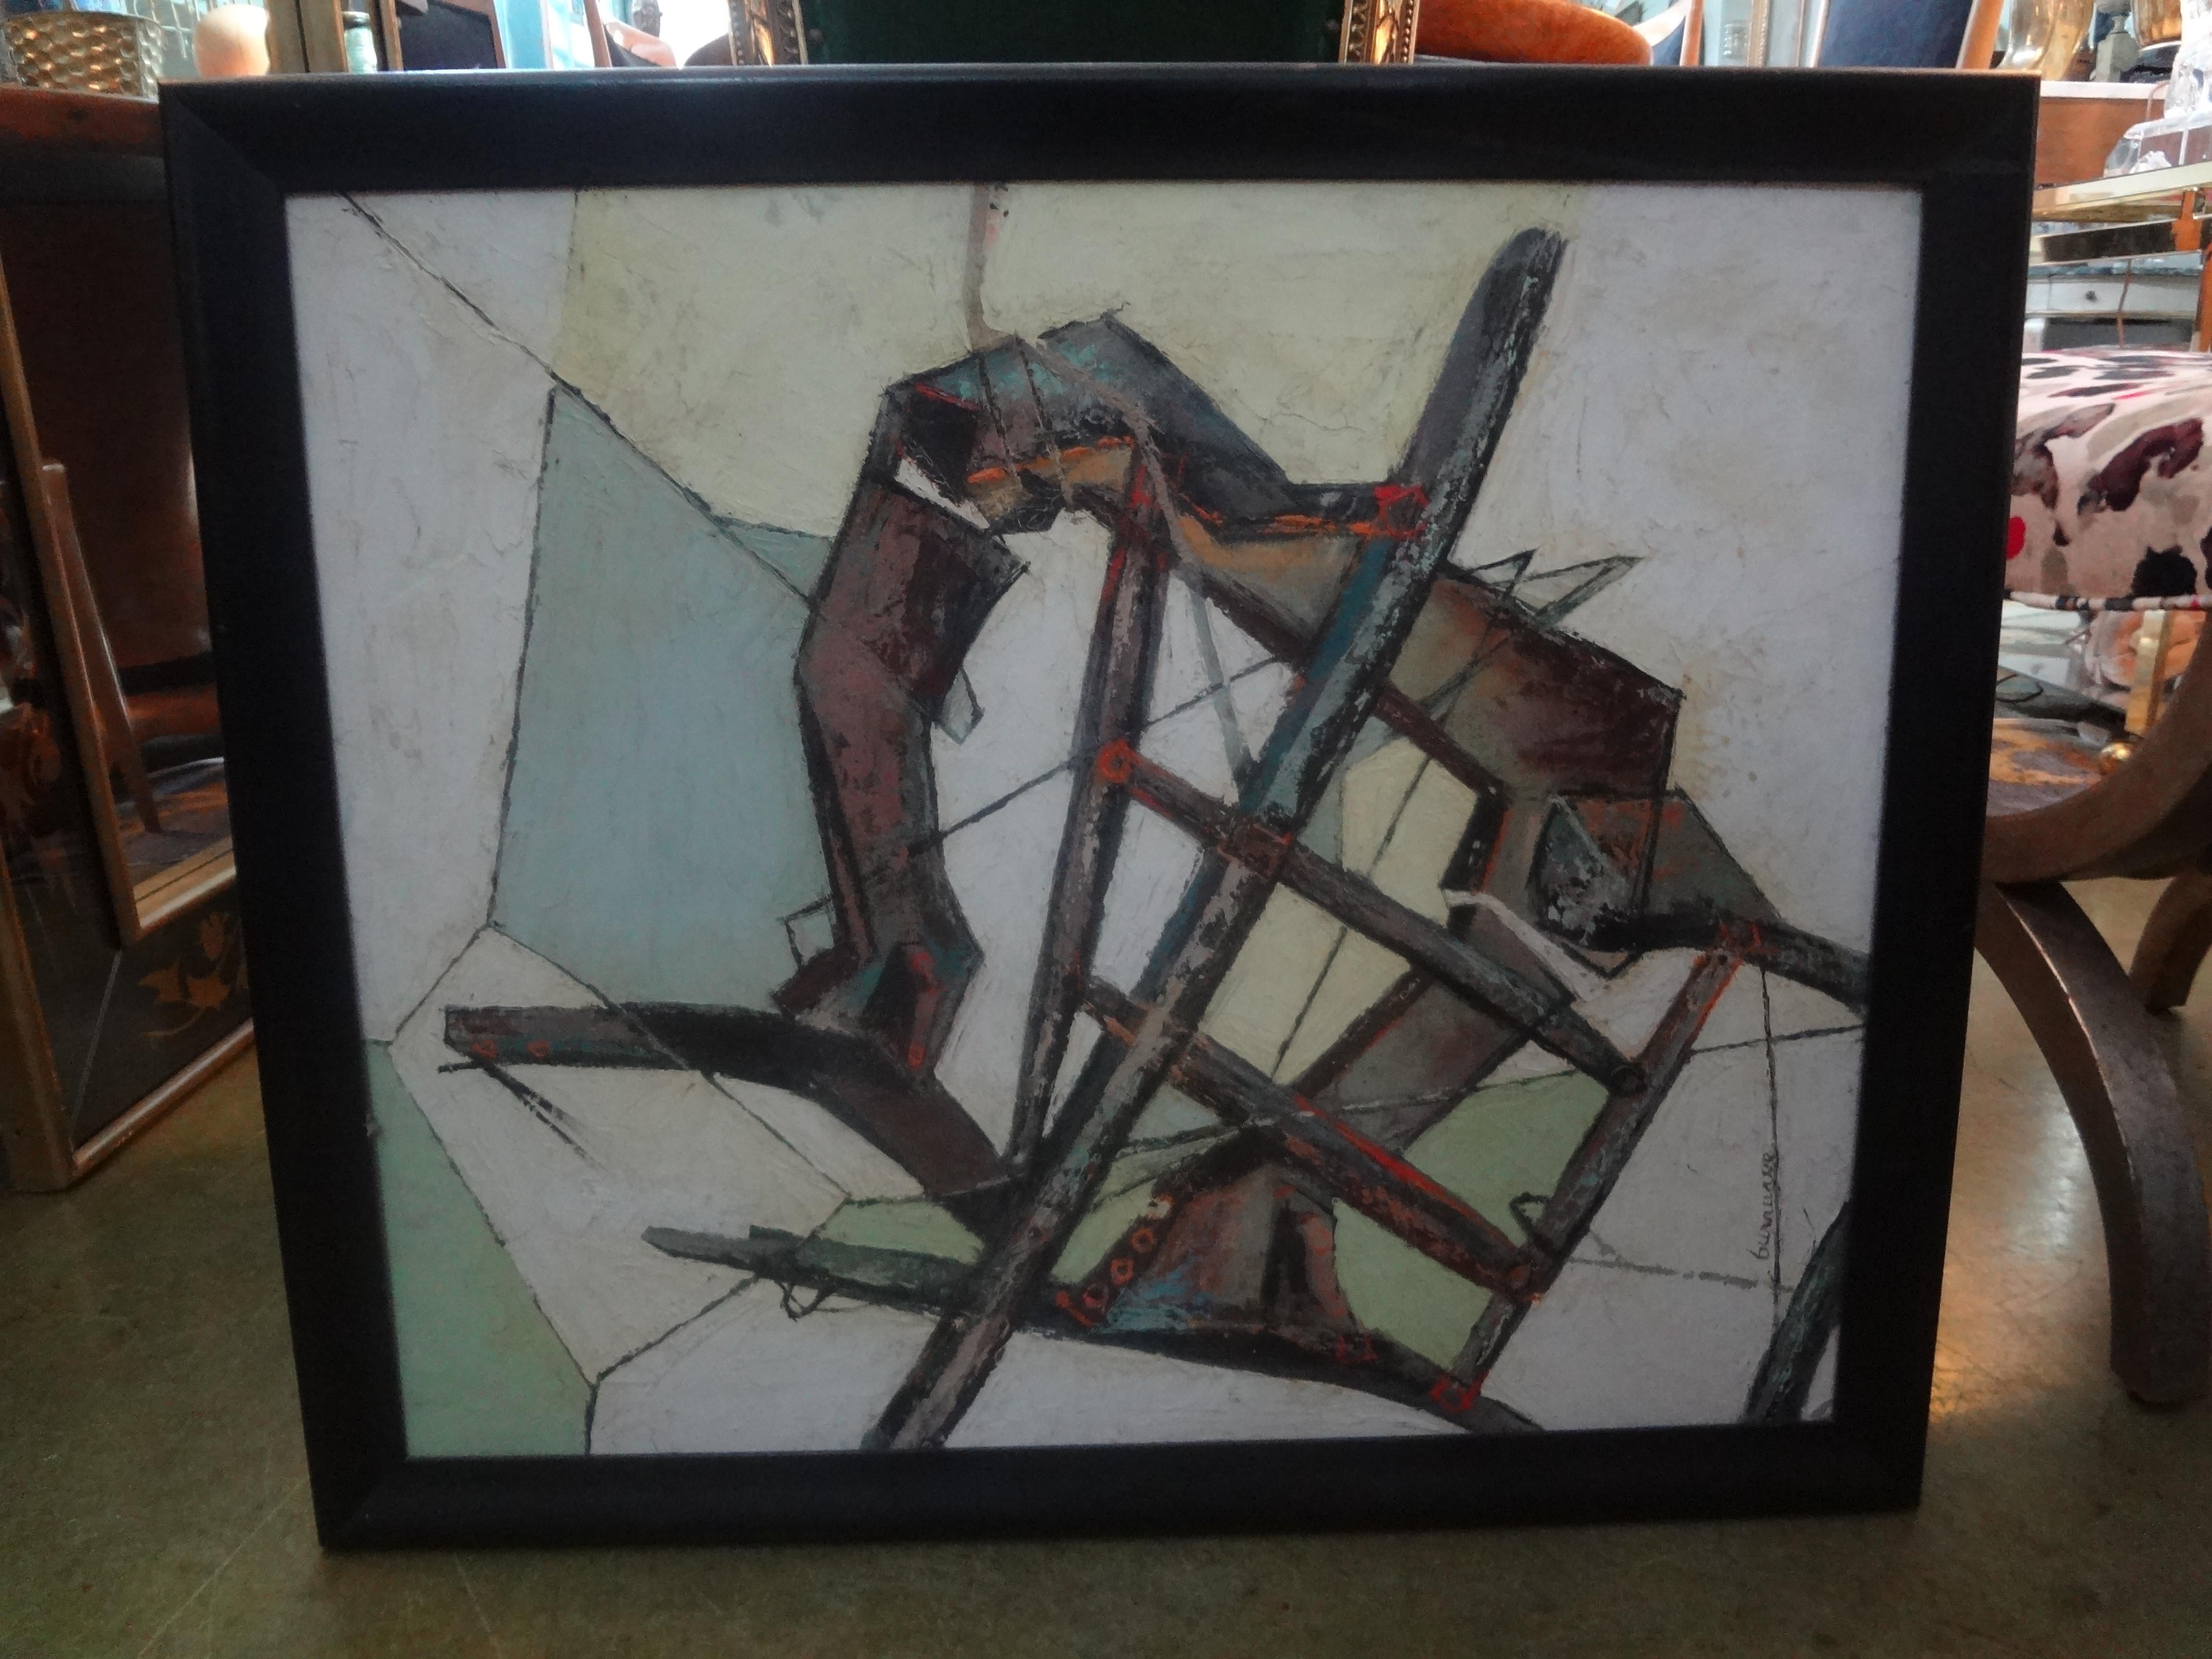 Mid-Century Modern abstract framed oil on board.
Stunning Mid-Century Modern abstract framed oil on board signed by artist. Signature is under research.
Frame has a few age related scuffs. Easy to repaint or replace if desired.